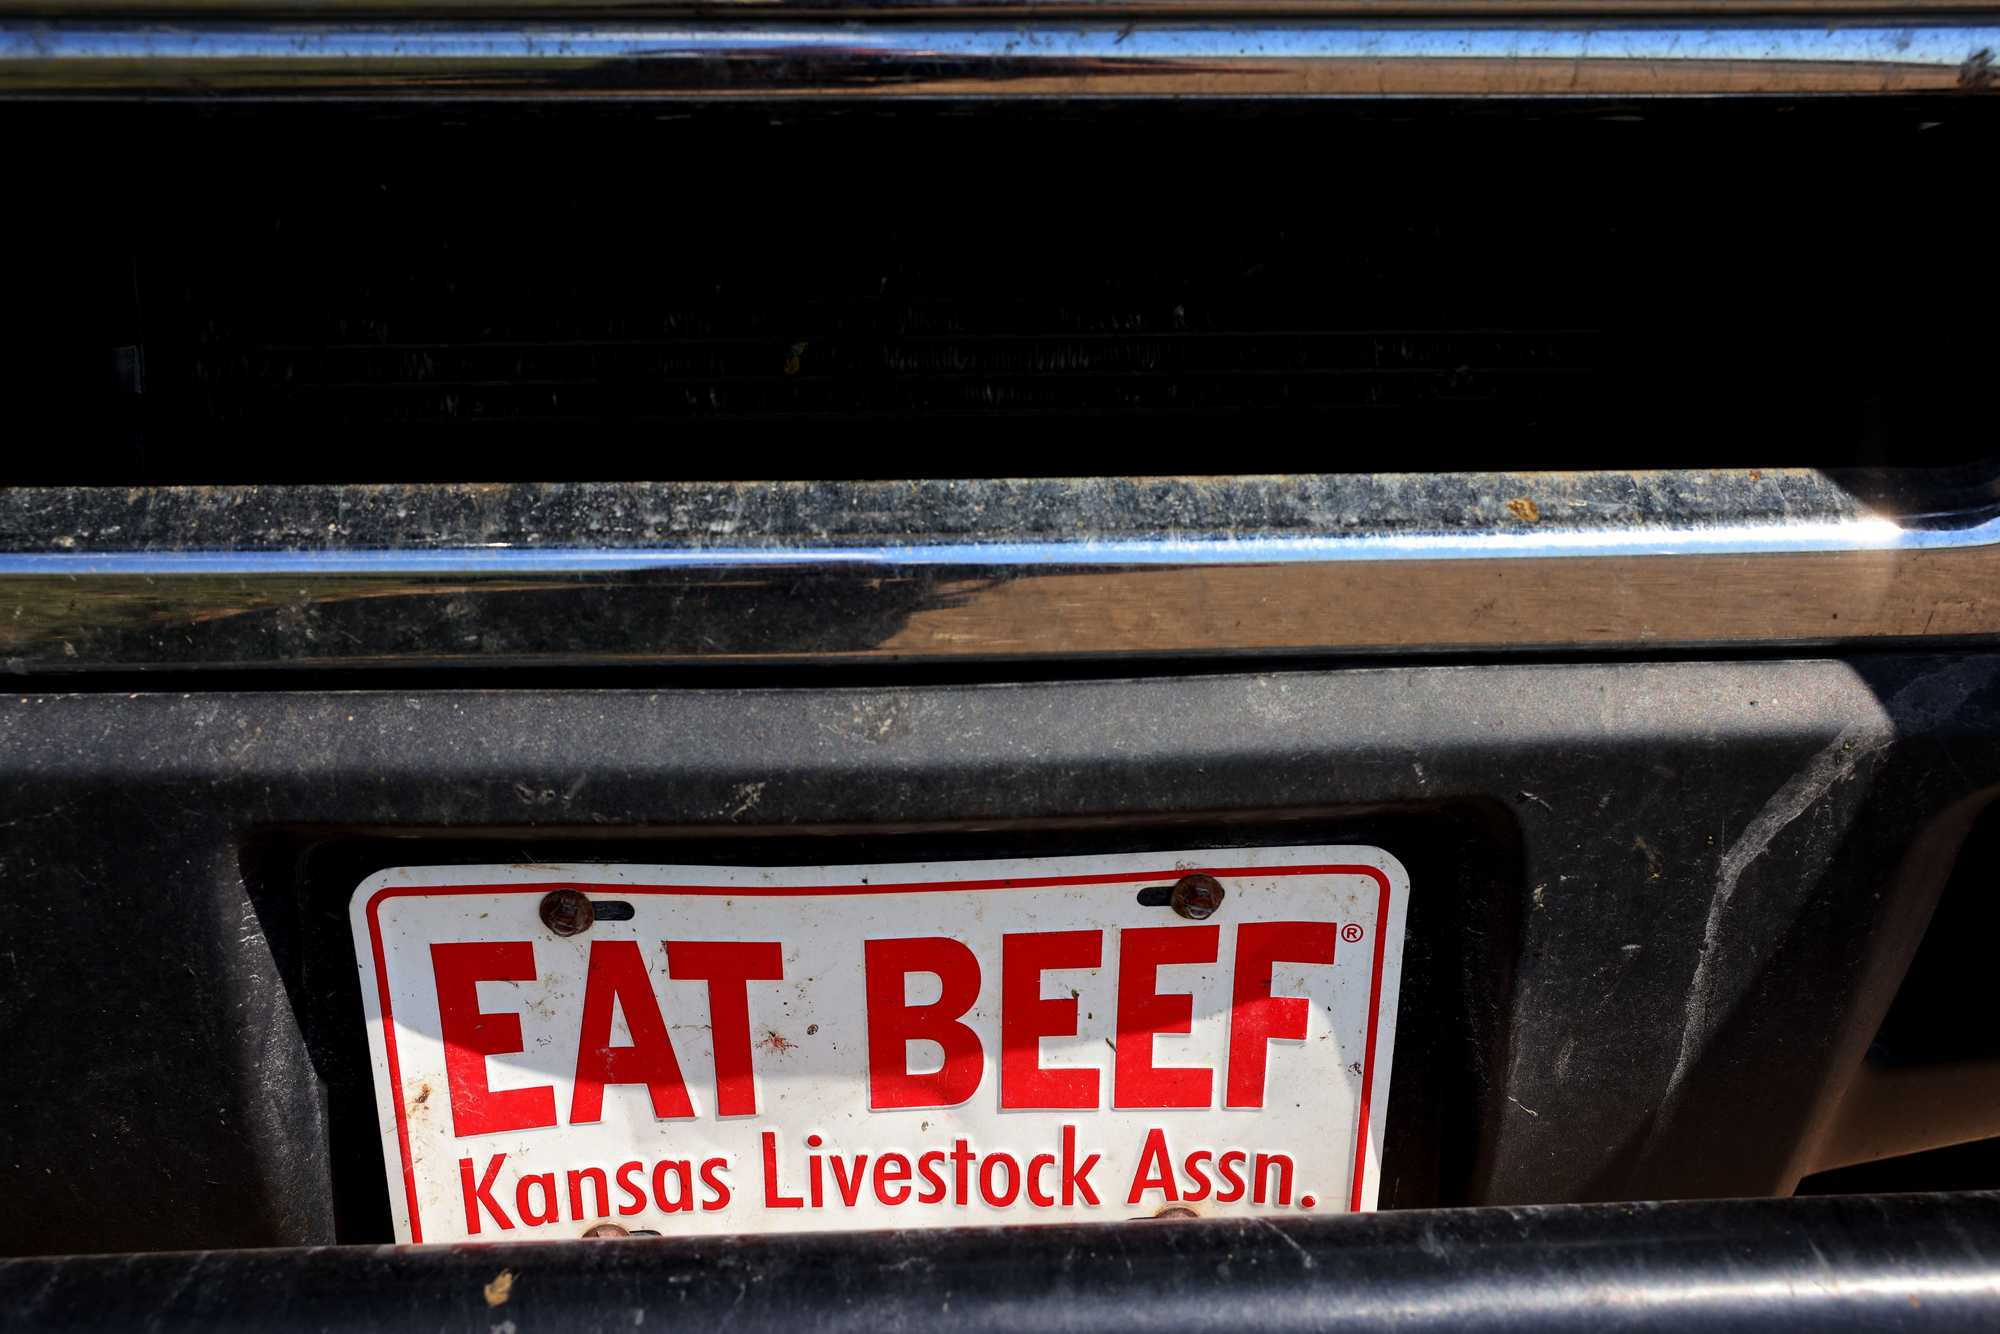 A plate on Neis's truck.